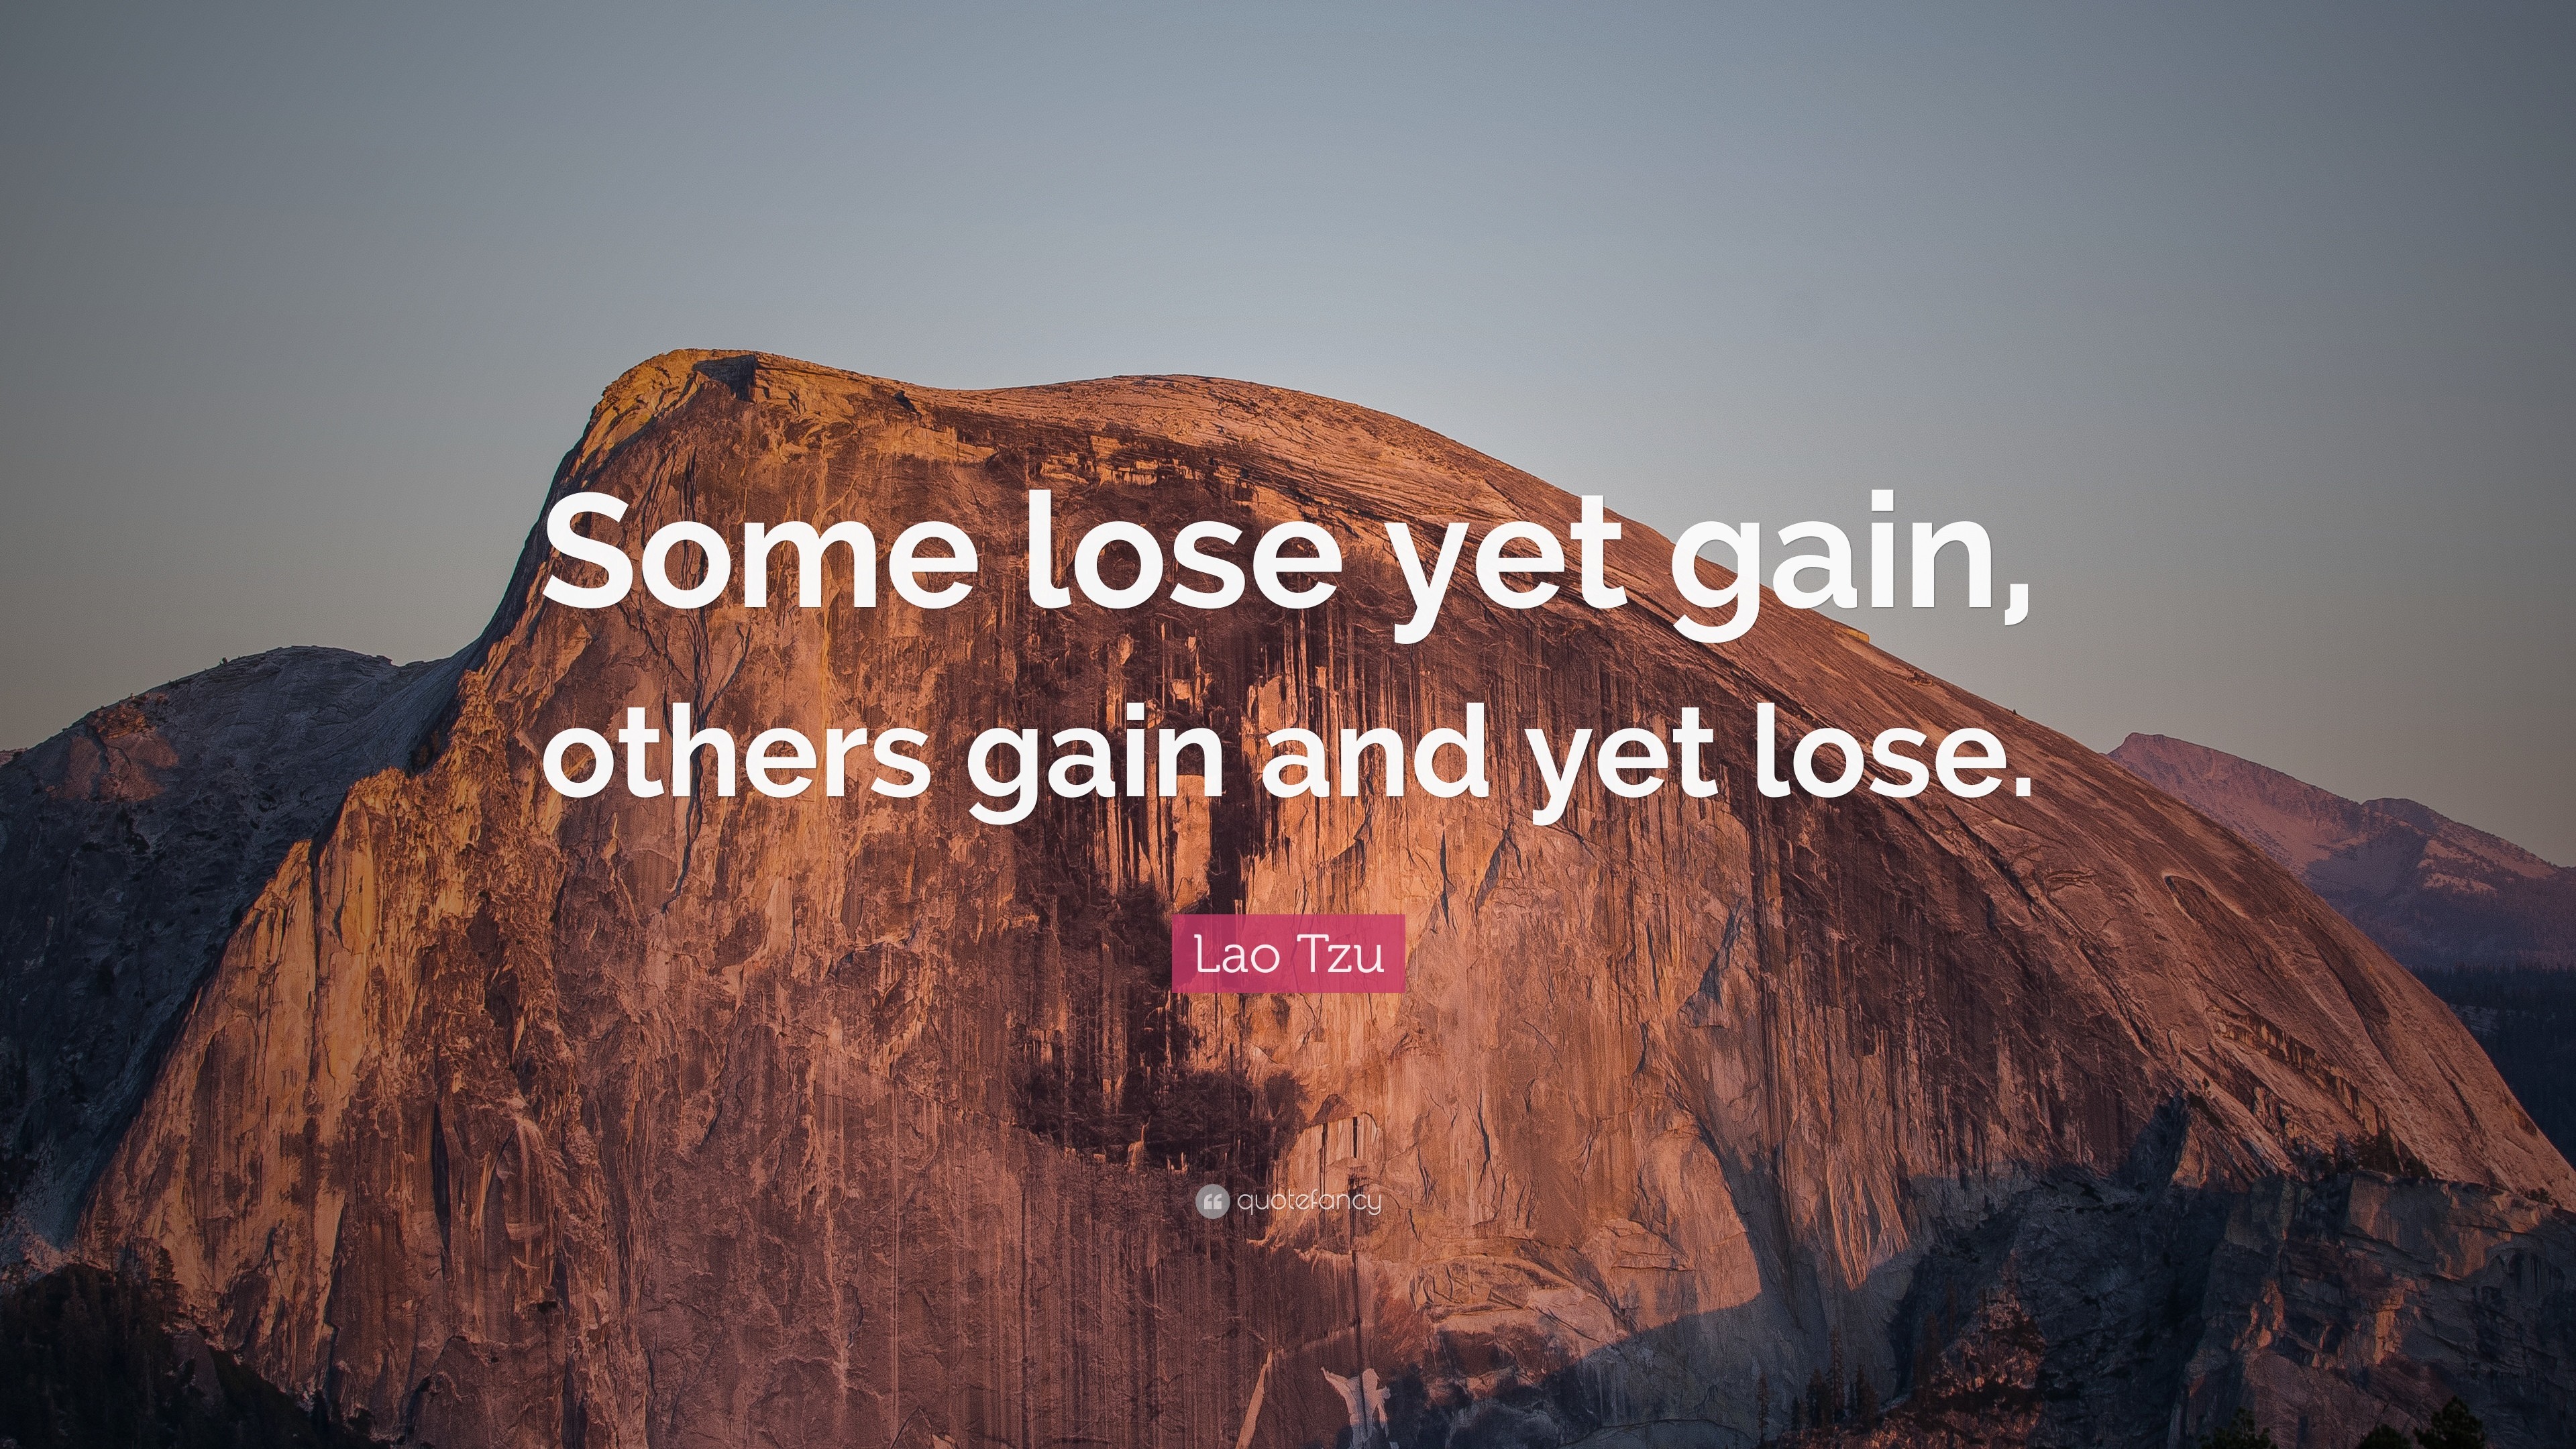 3840x2160 Lao Tzu Quote: "Some lose yet gain, others gain and yet lose...